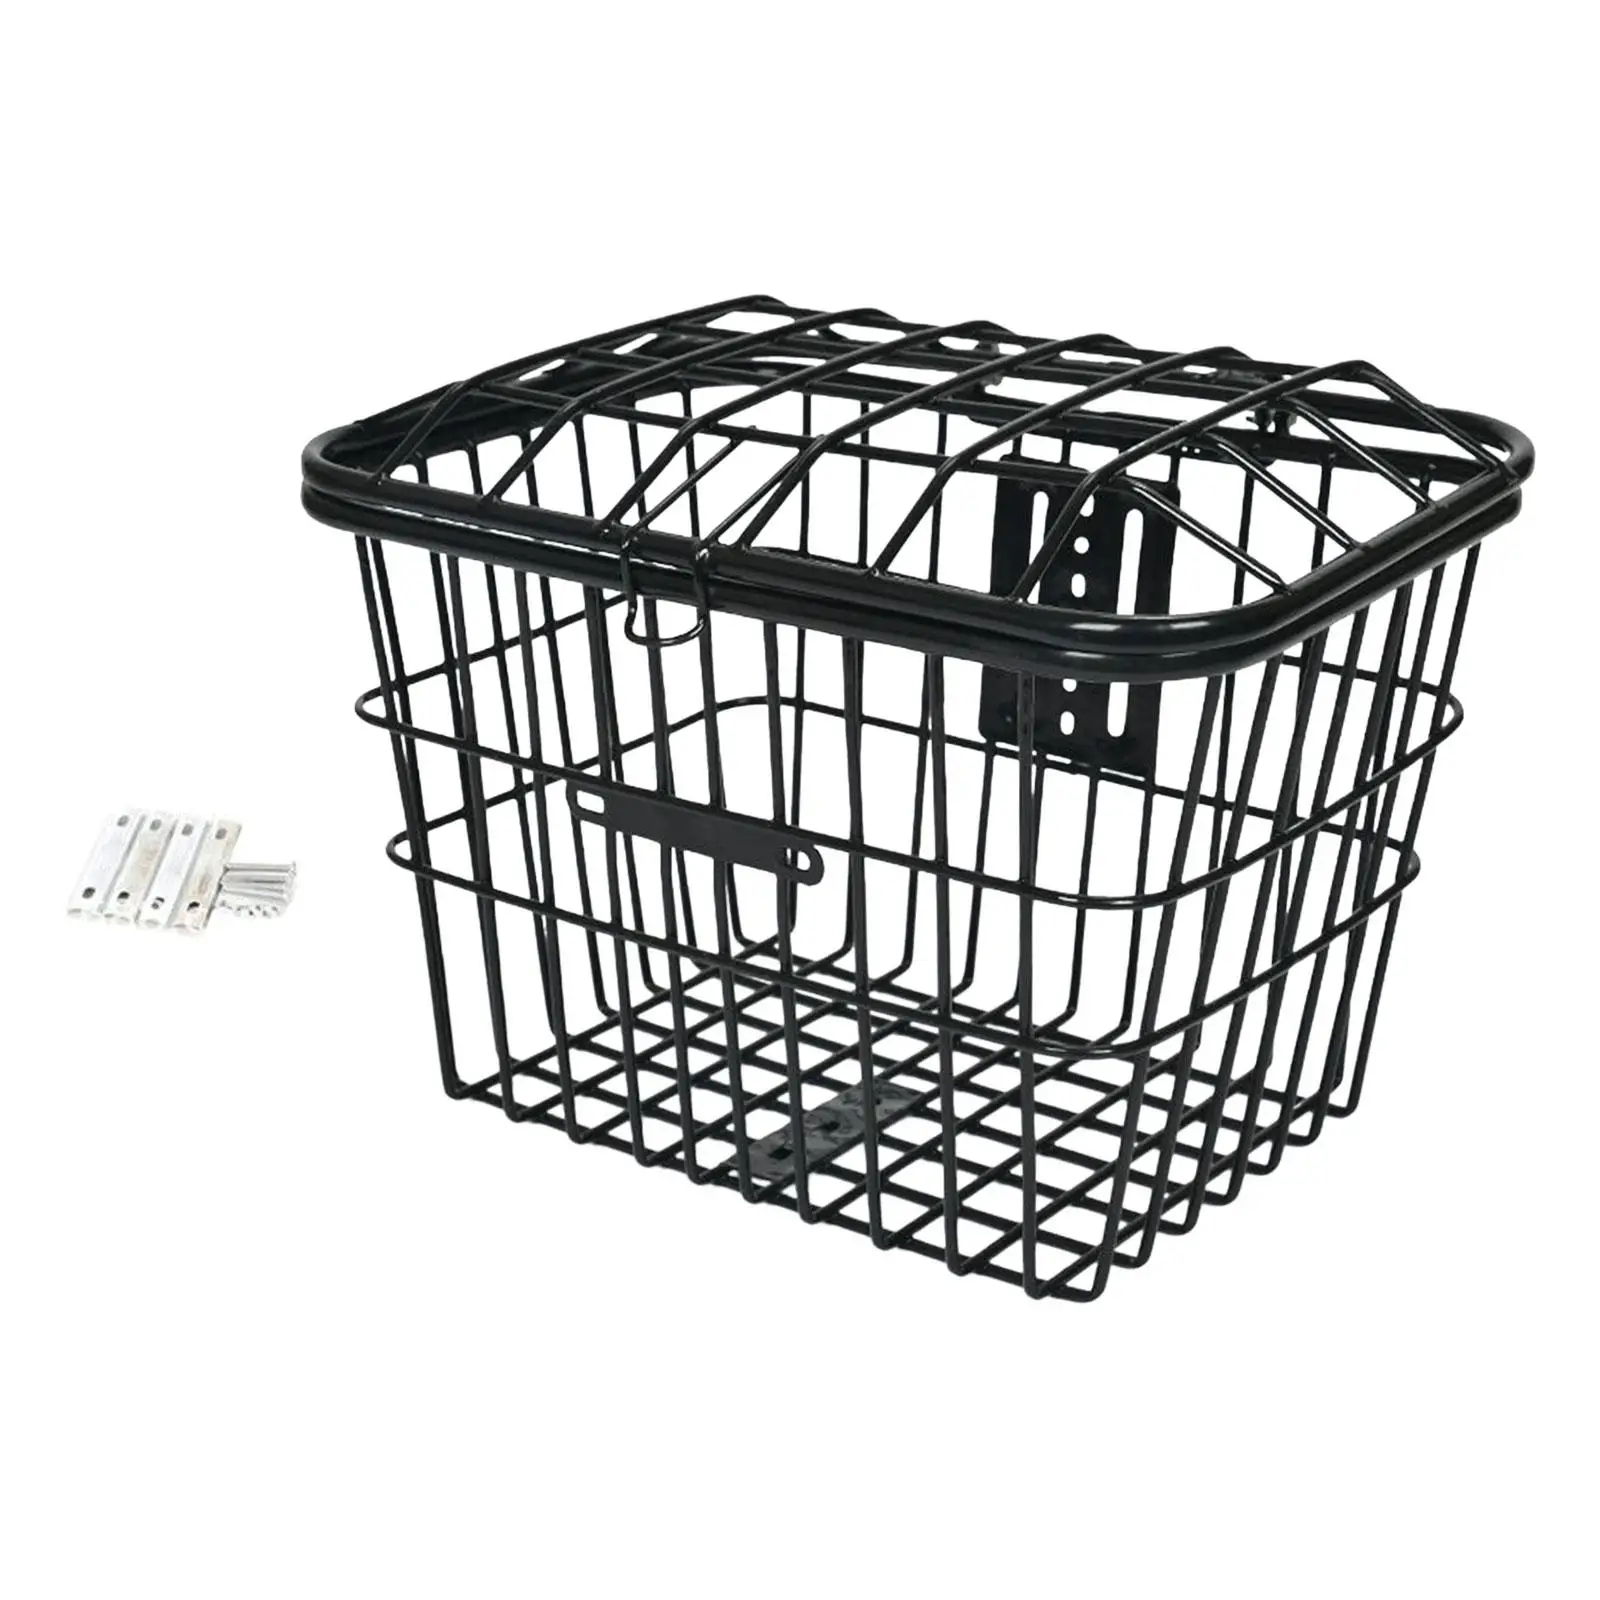 Bike Metal Mesh Front or Rear Basket with Lid Durable Weatherproof Accessories Strengthened Frame for Adult Women Men Bikes